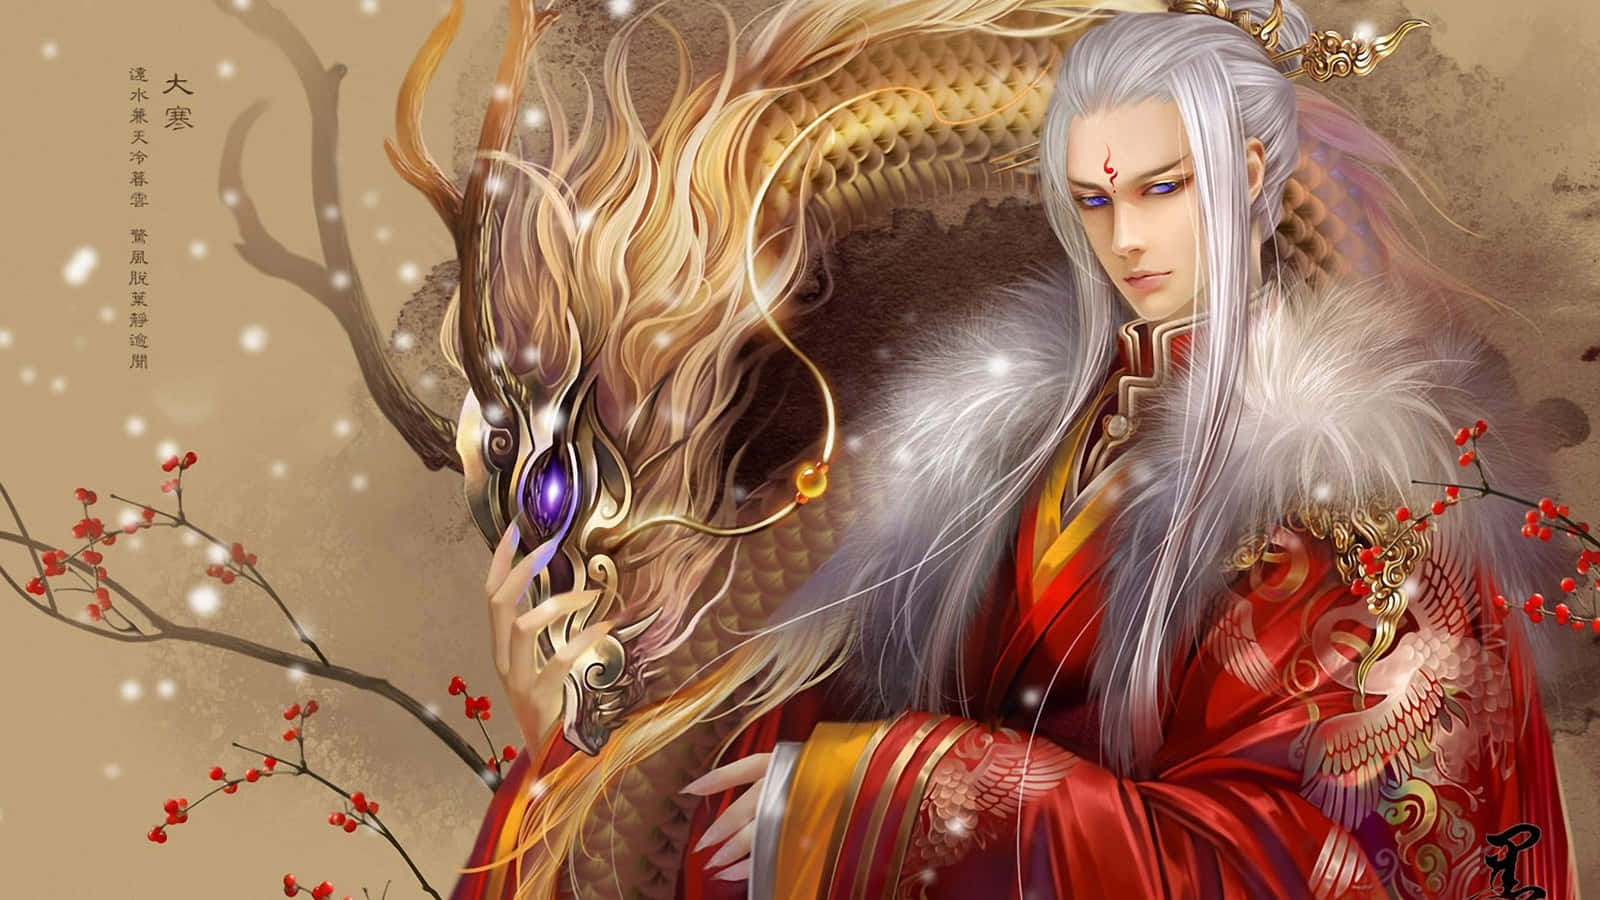 Most Awe-Inspiring Dragons In Anime - Ultimate Guide To Anime Dragons